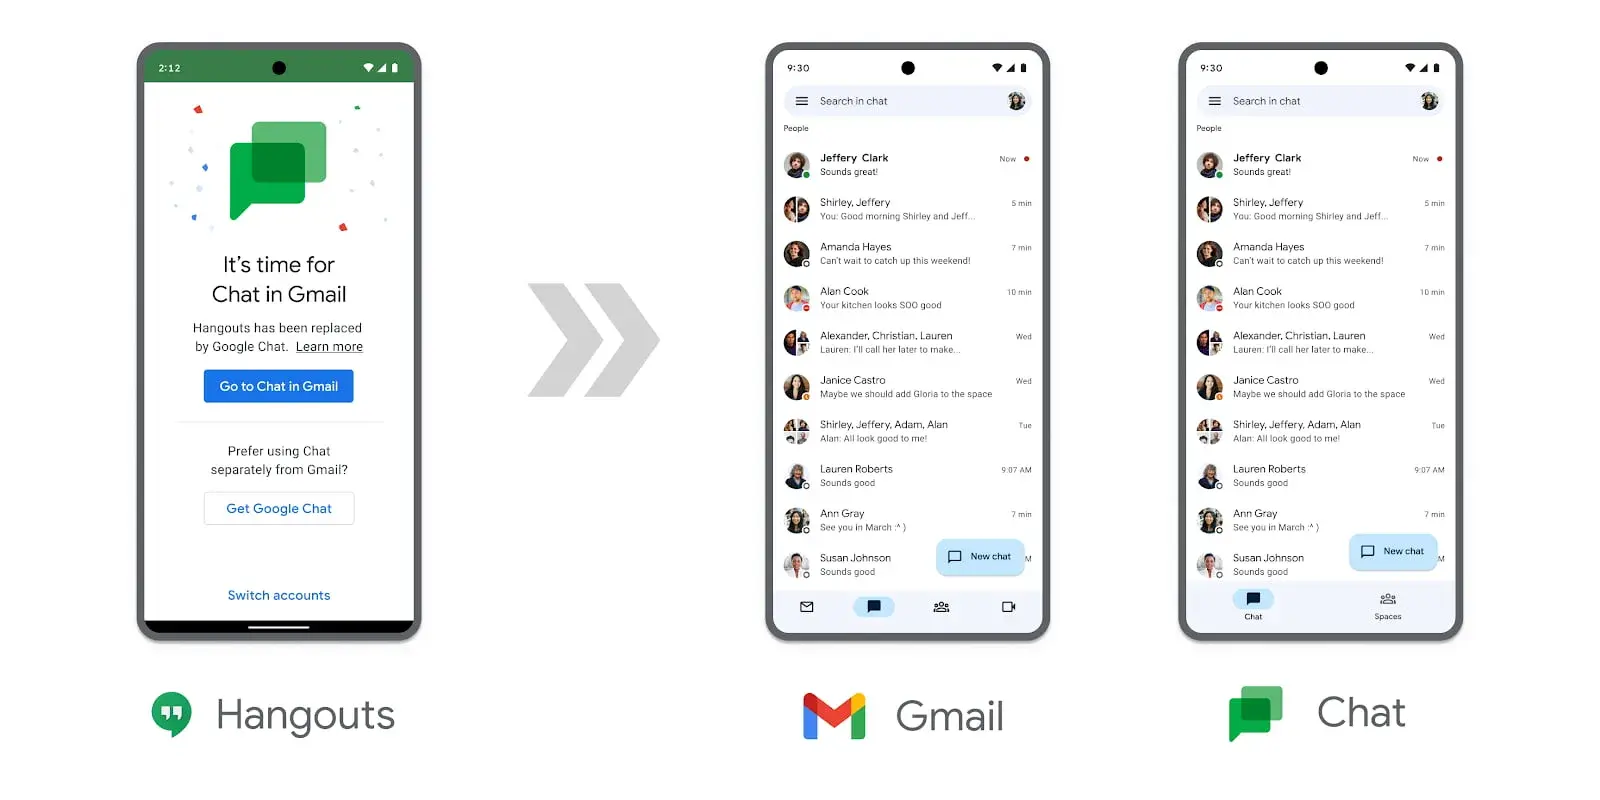 Free Google Hangouts users will be asked to migrate to Google Chat starting today